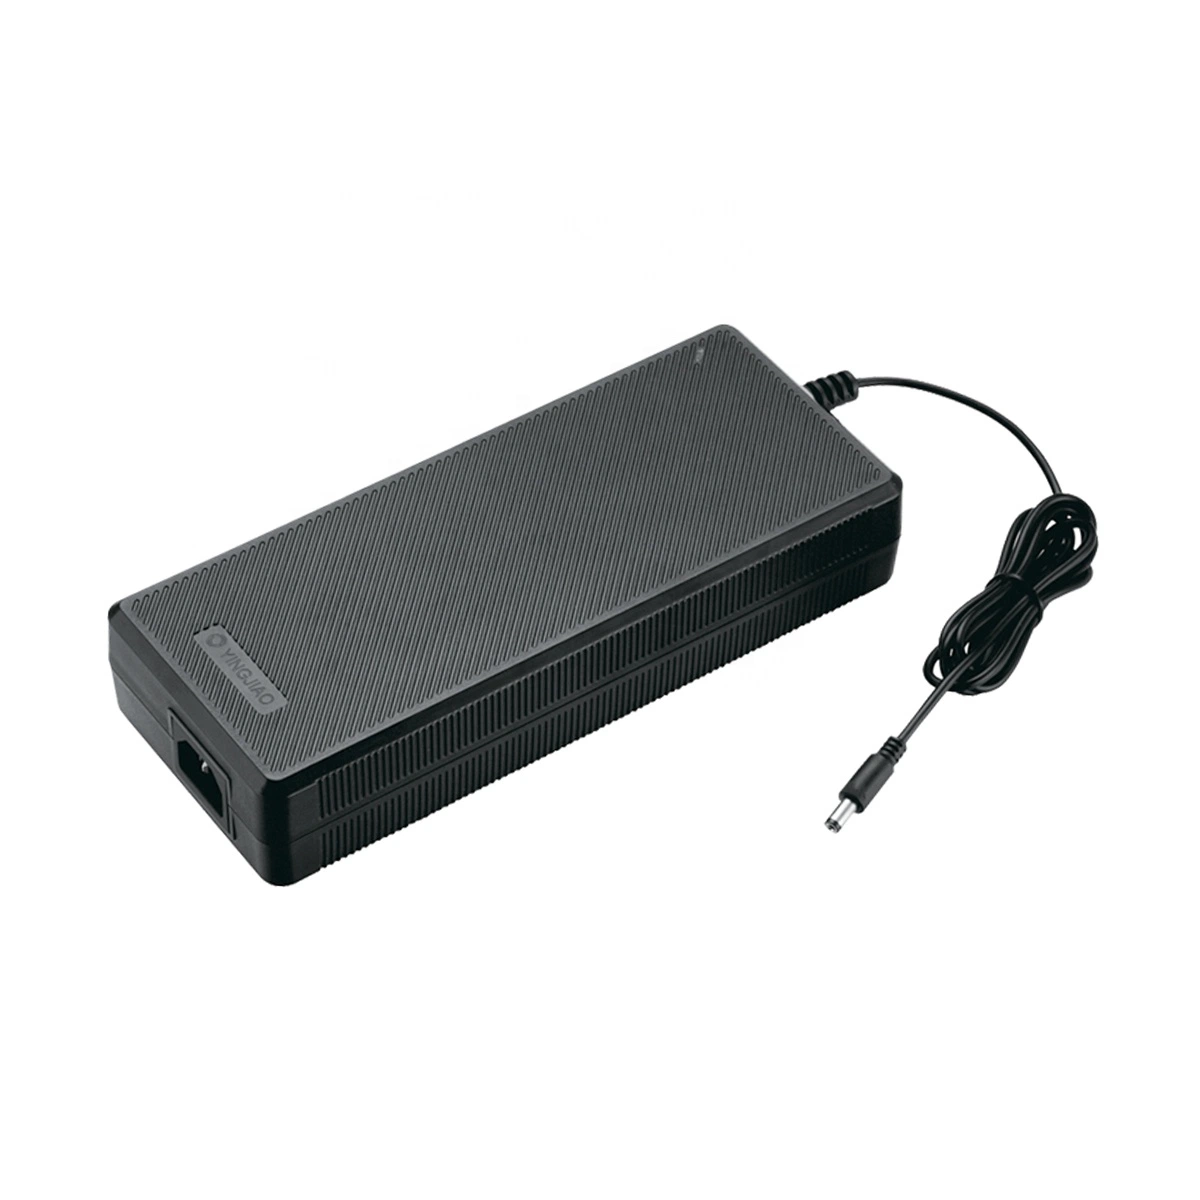 Lithium Li-ion Battery Charger 18650 Batteries Battery Charger